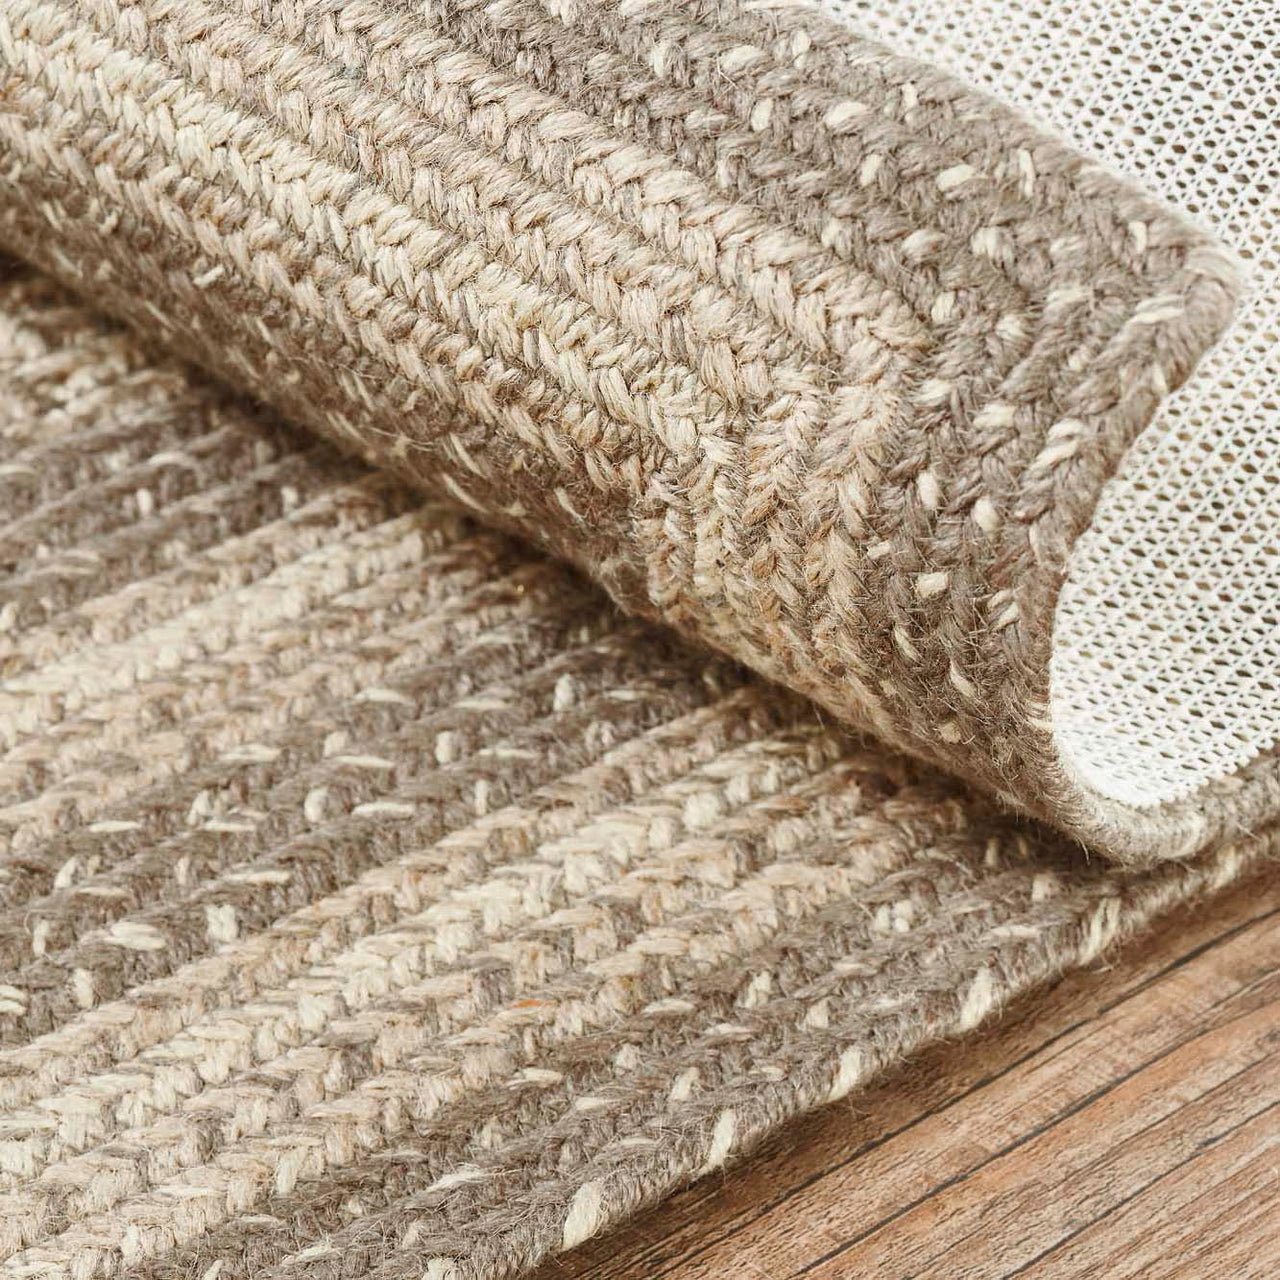 Cobblestone Jute Braided Rug Rect with Rug Pad 5'x8' VHC Brands